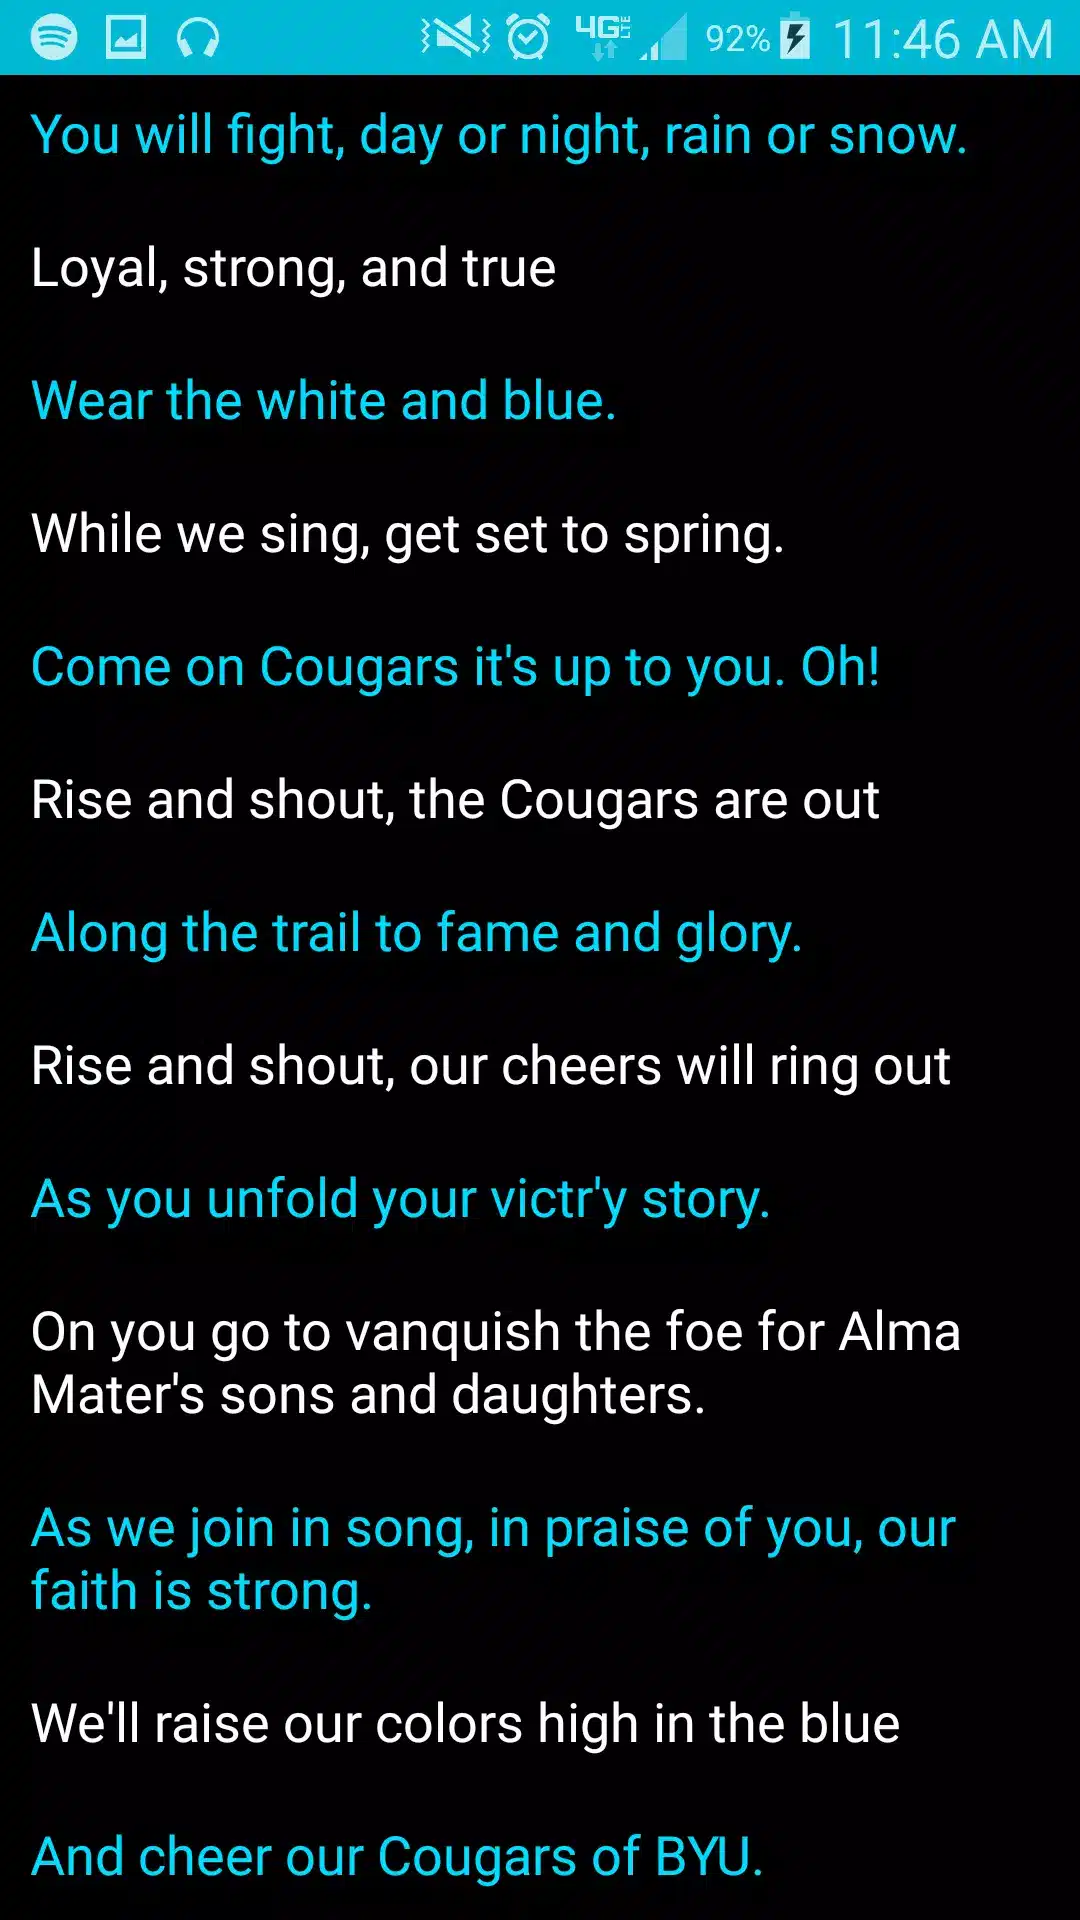 BYU Cougar Fight Song Image 2